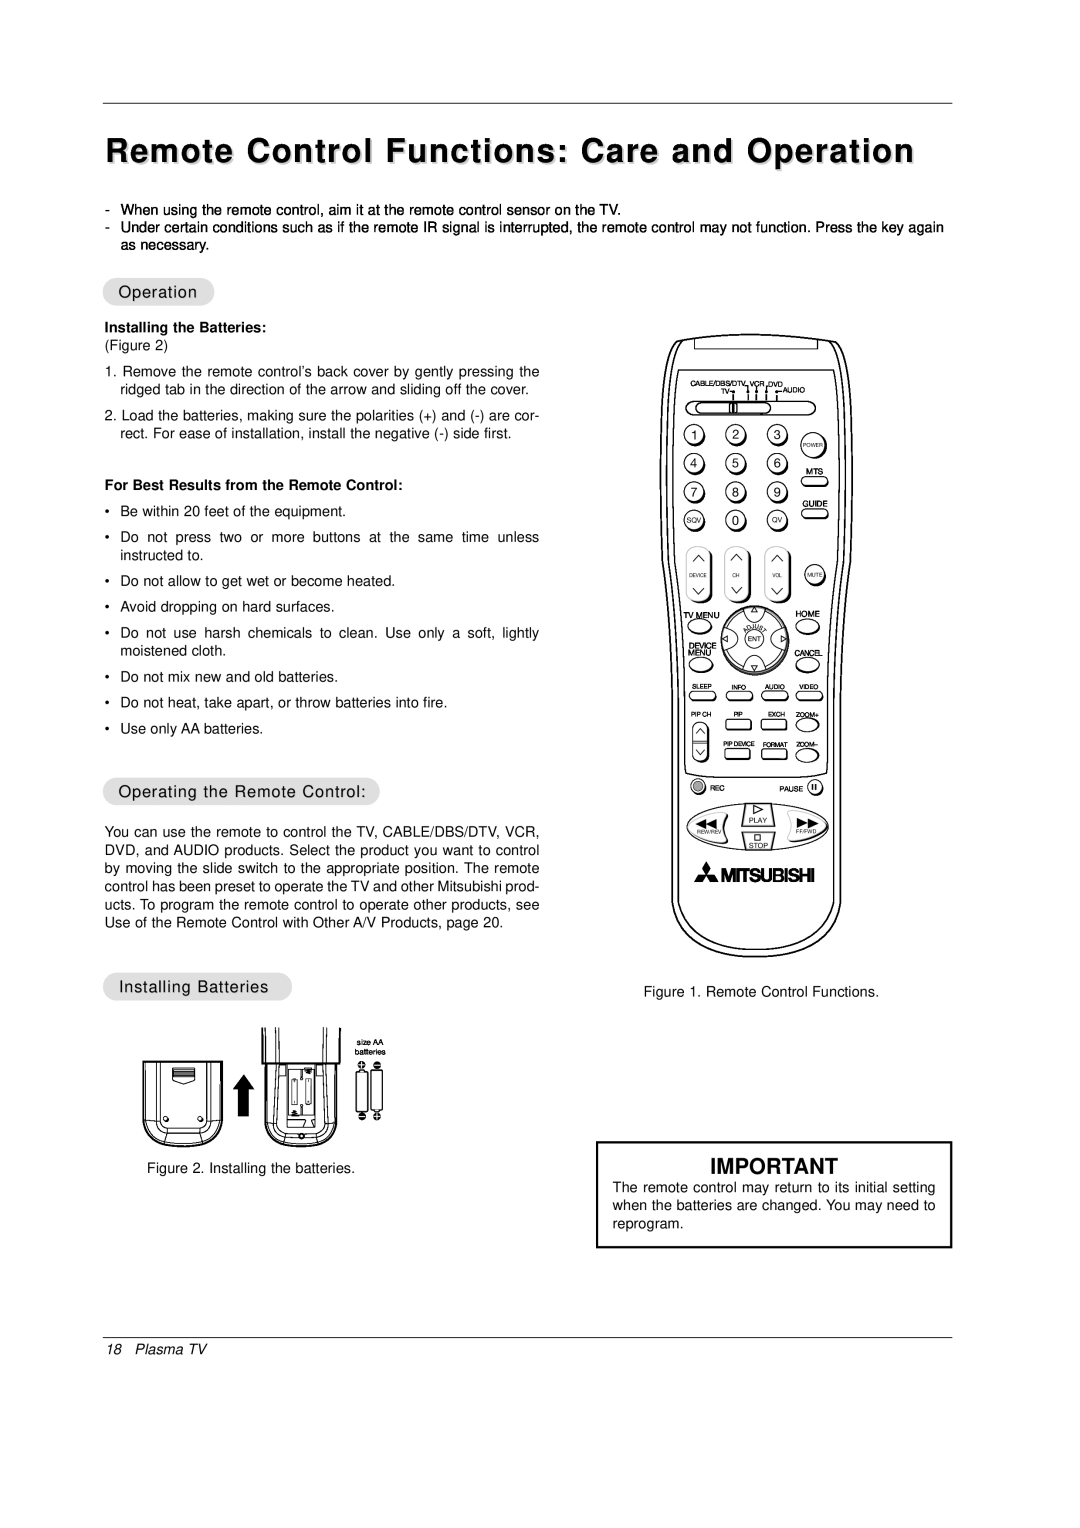 Mitsubishi Electronics PD-4225S manual Remote Control Functions Care and Operation, Operating the Remote Control, Plasma TV 